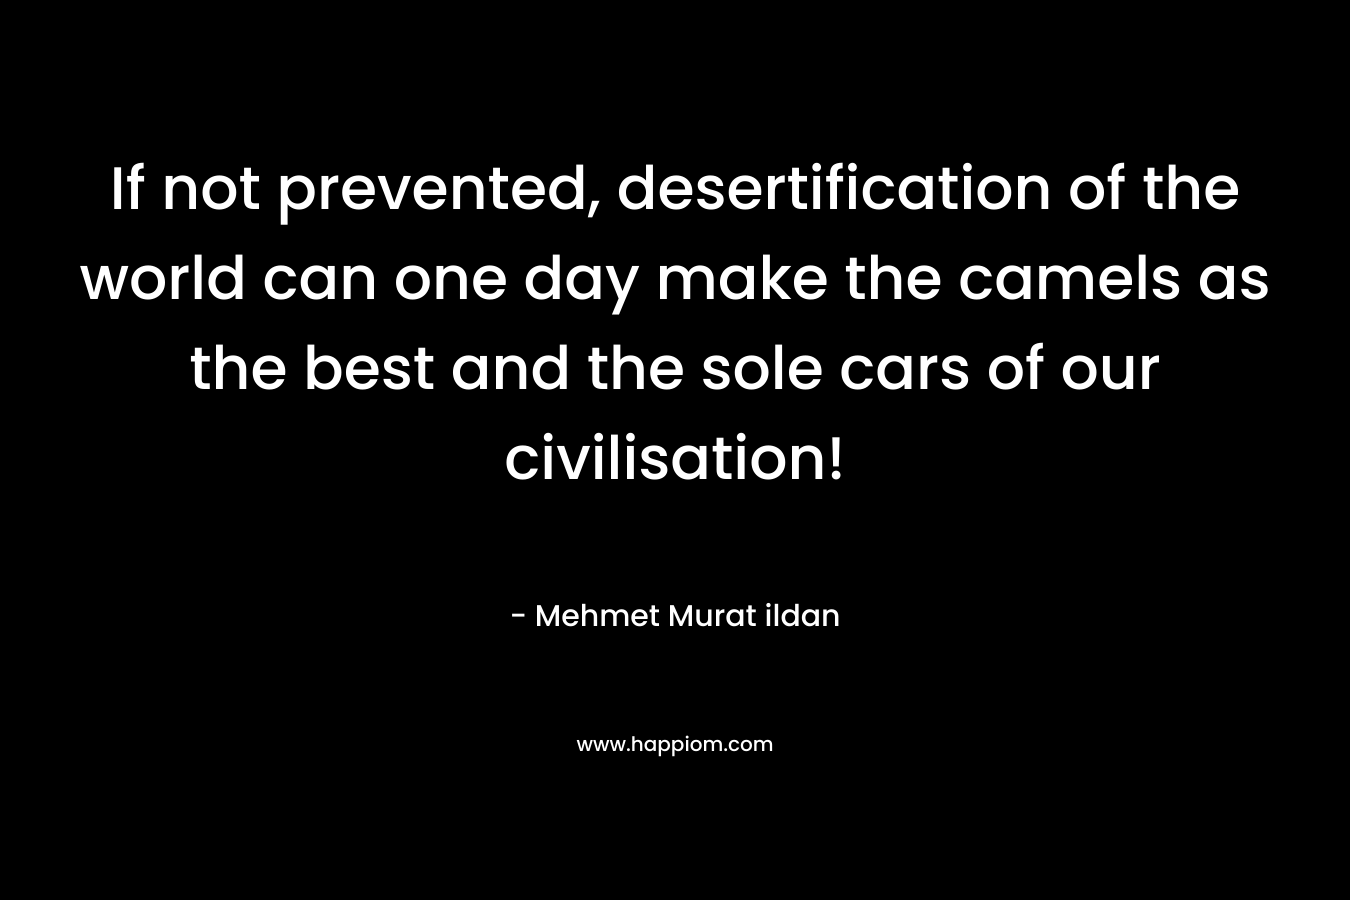 If not prevented, desertification of the world can one day make the camels as the best and the sole cars of our civilisation! – Mehmet Murat ildan